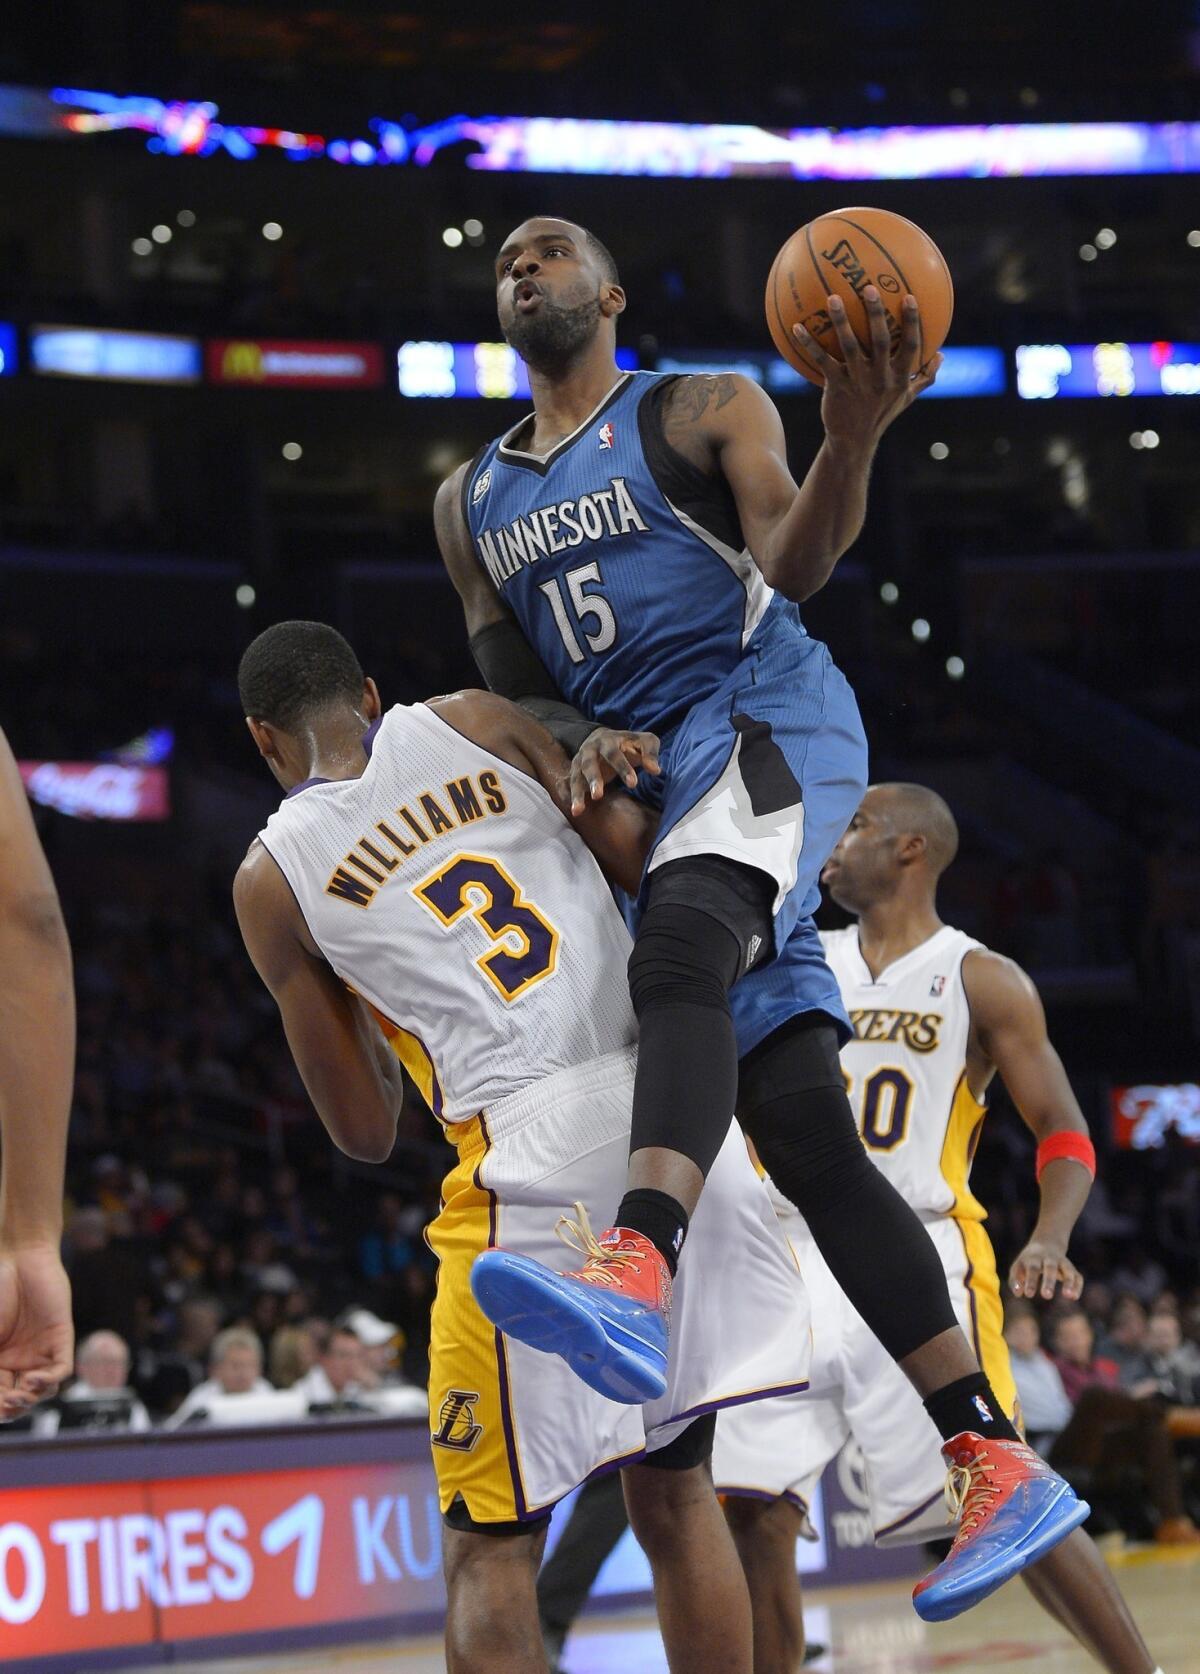 Minnesota Timberwolves rookie Shabazz Muhammad puts up a shot over Lakers forward Shawne Williams during a game on Nov. 10. Muhammad's off-court attire no longer includes a Jonas Brothers backpack.